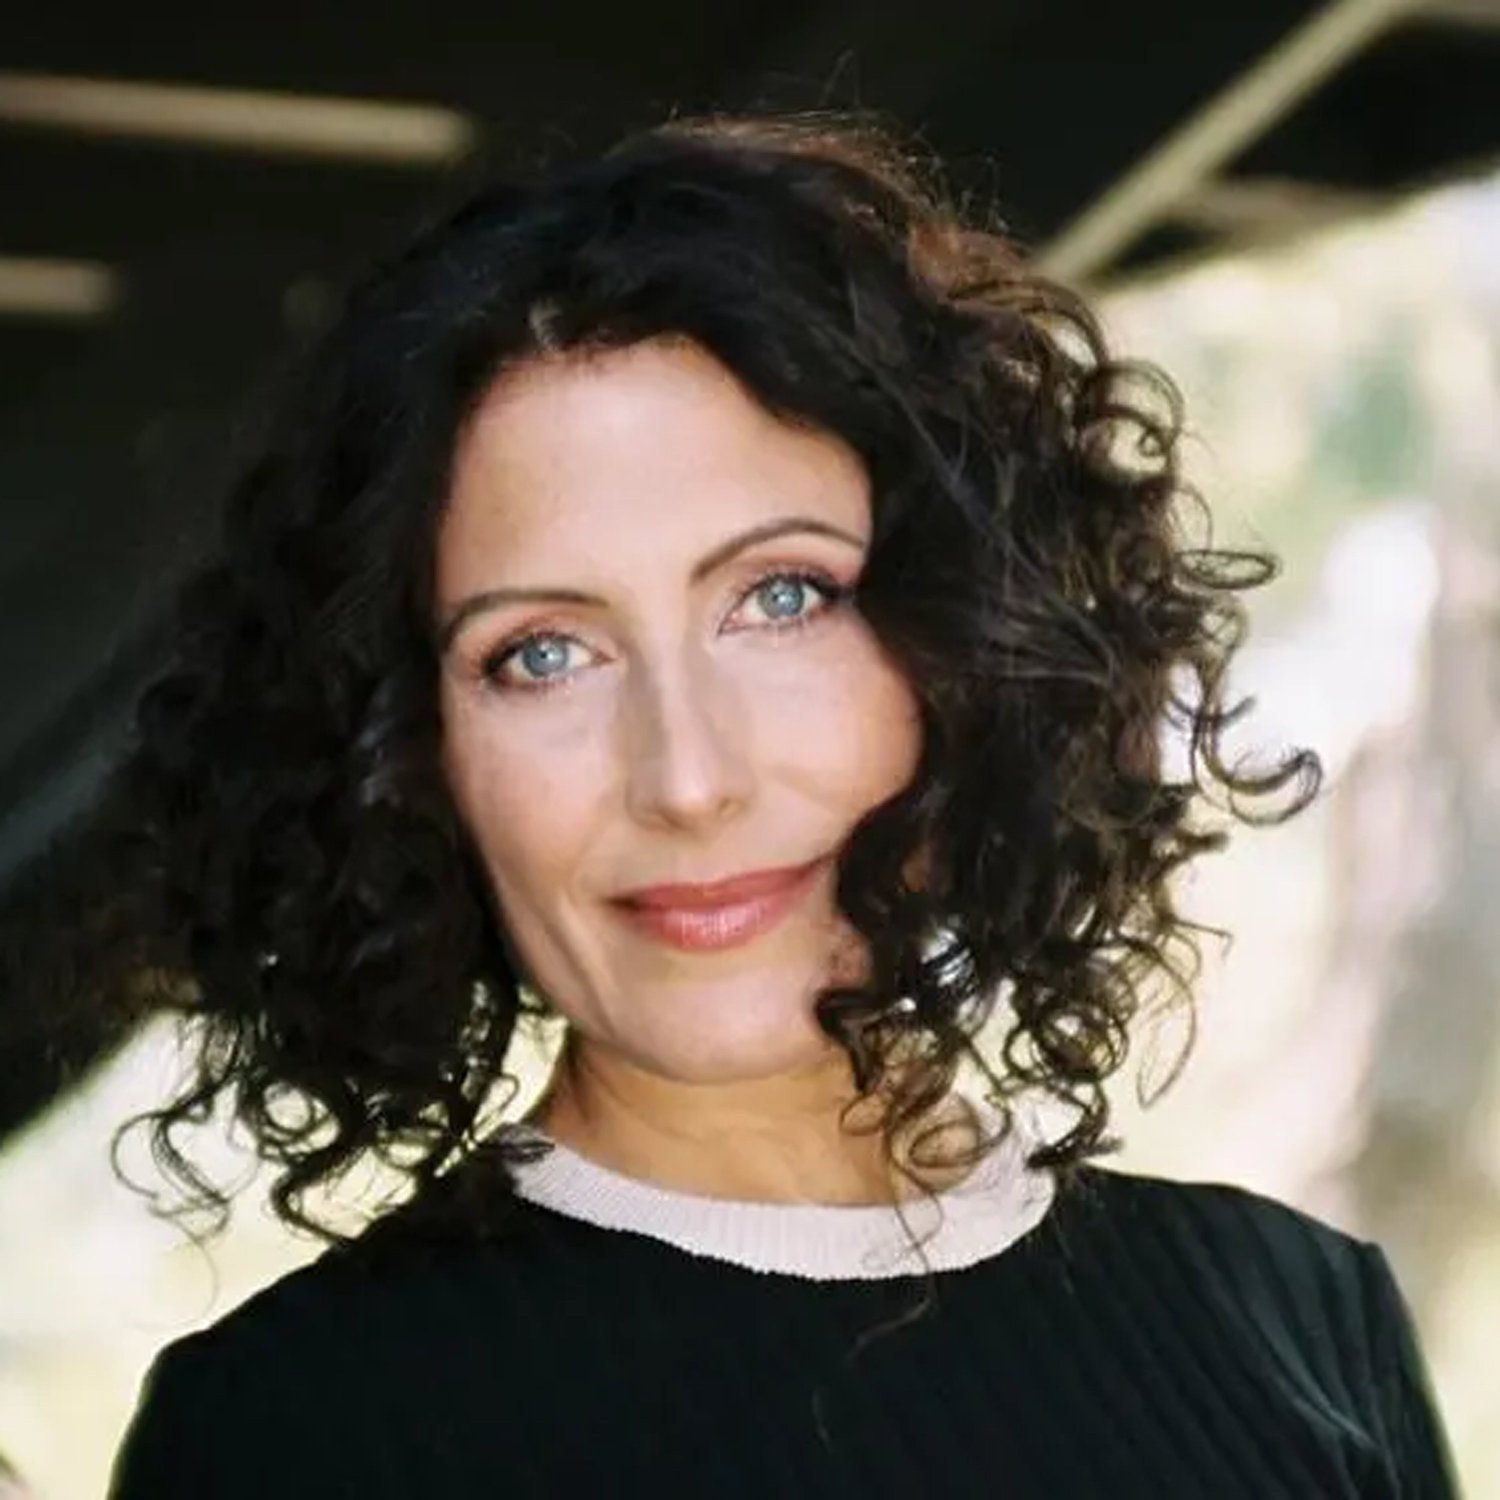 LISA EDELSTEIN - From Acting to Directing, Writing & Visual Art